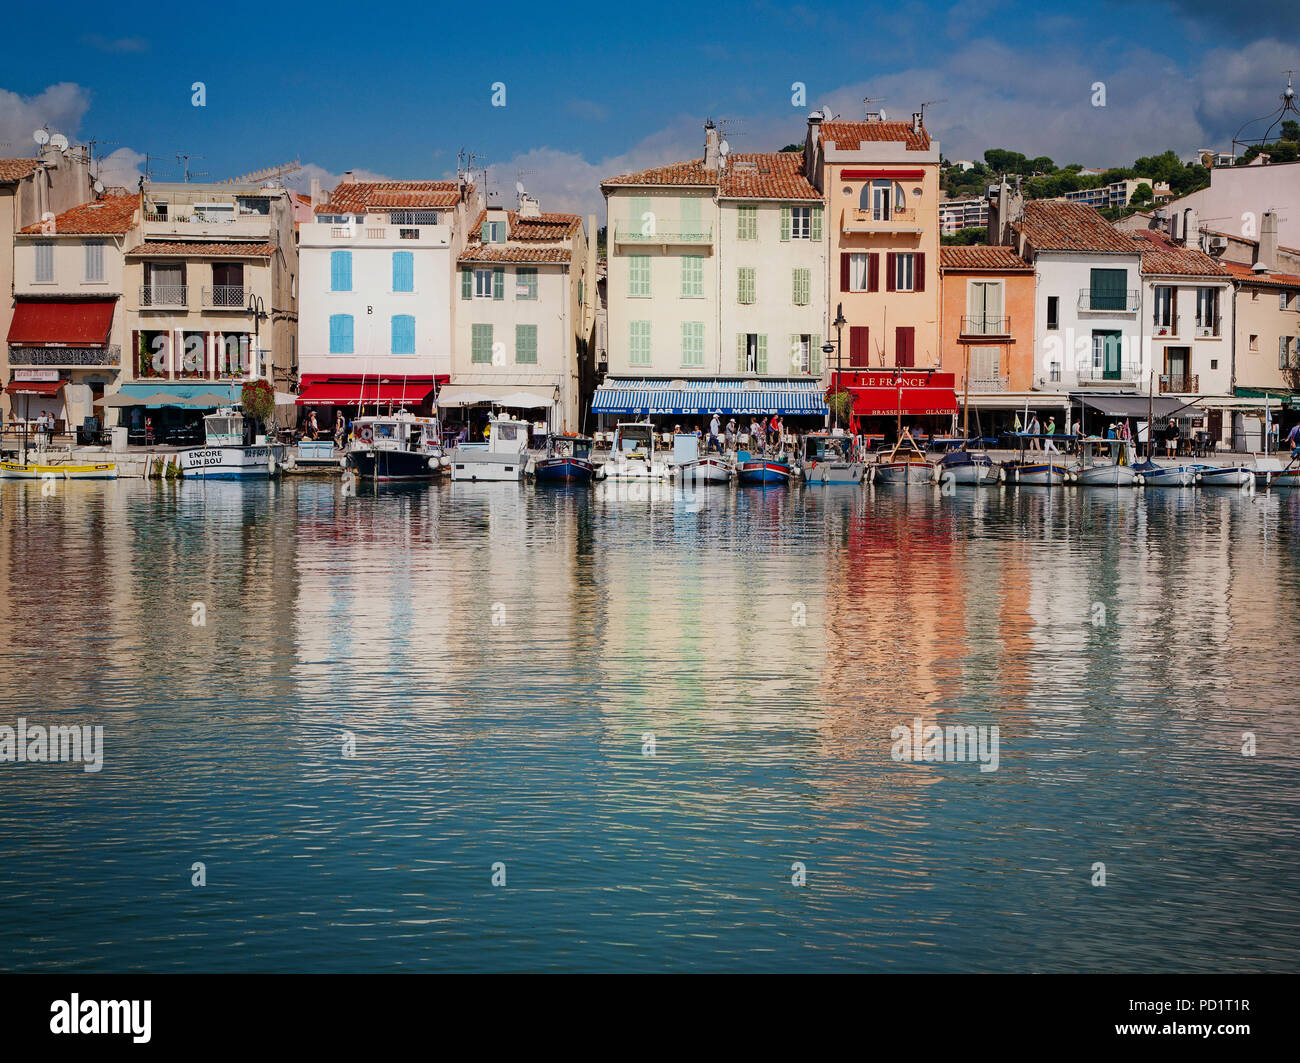 The harbor at Cassis, France, on the Cote d' Azur. Stock Photo